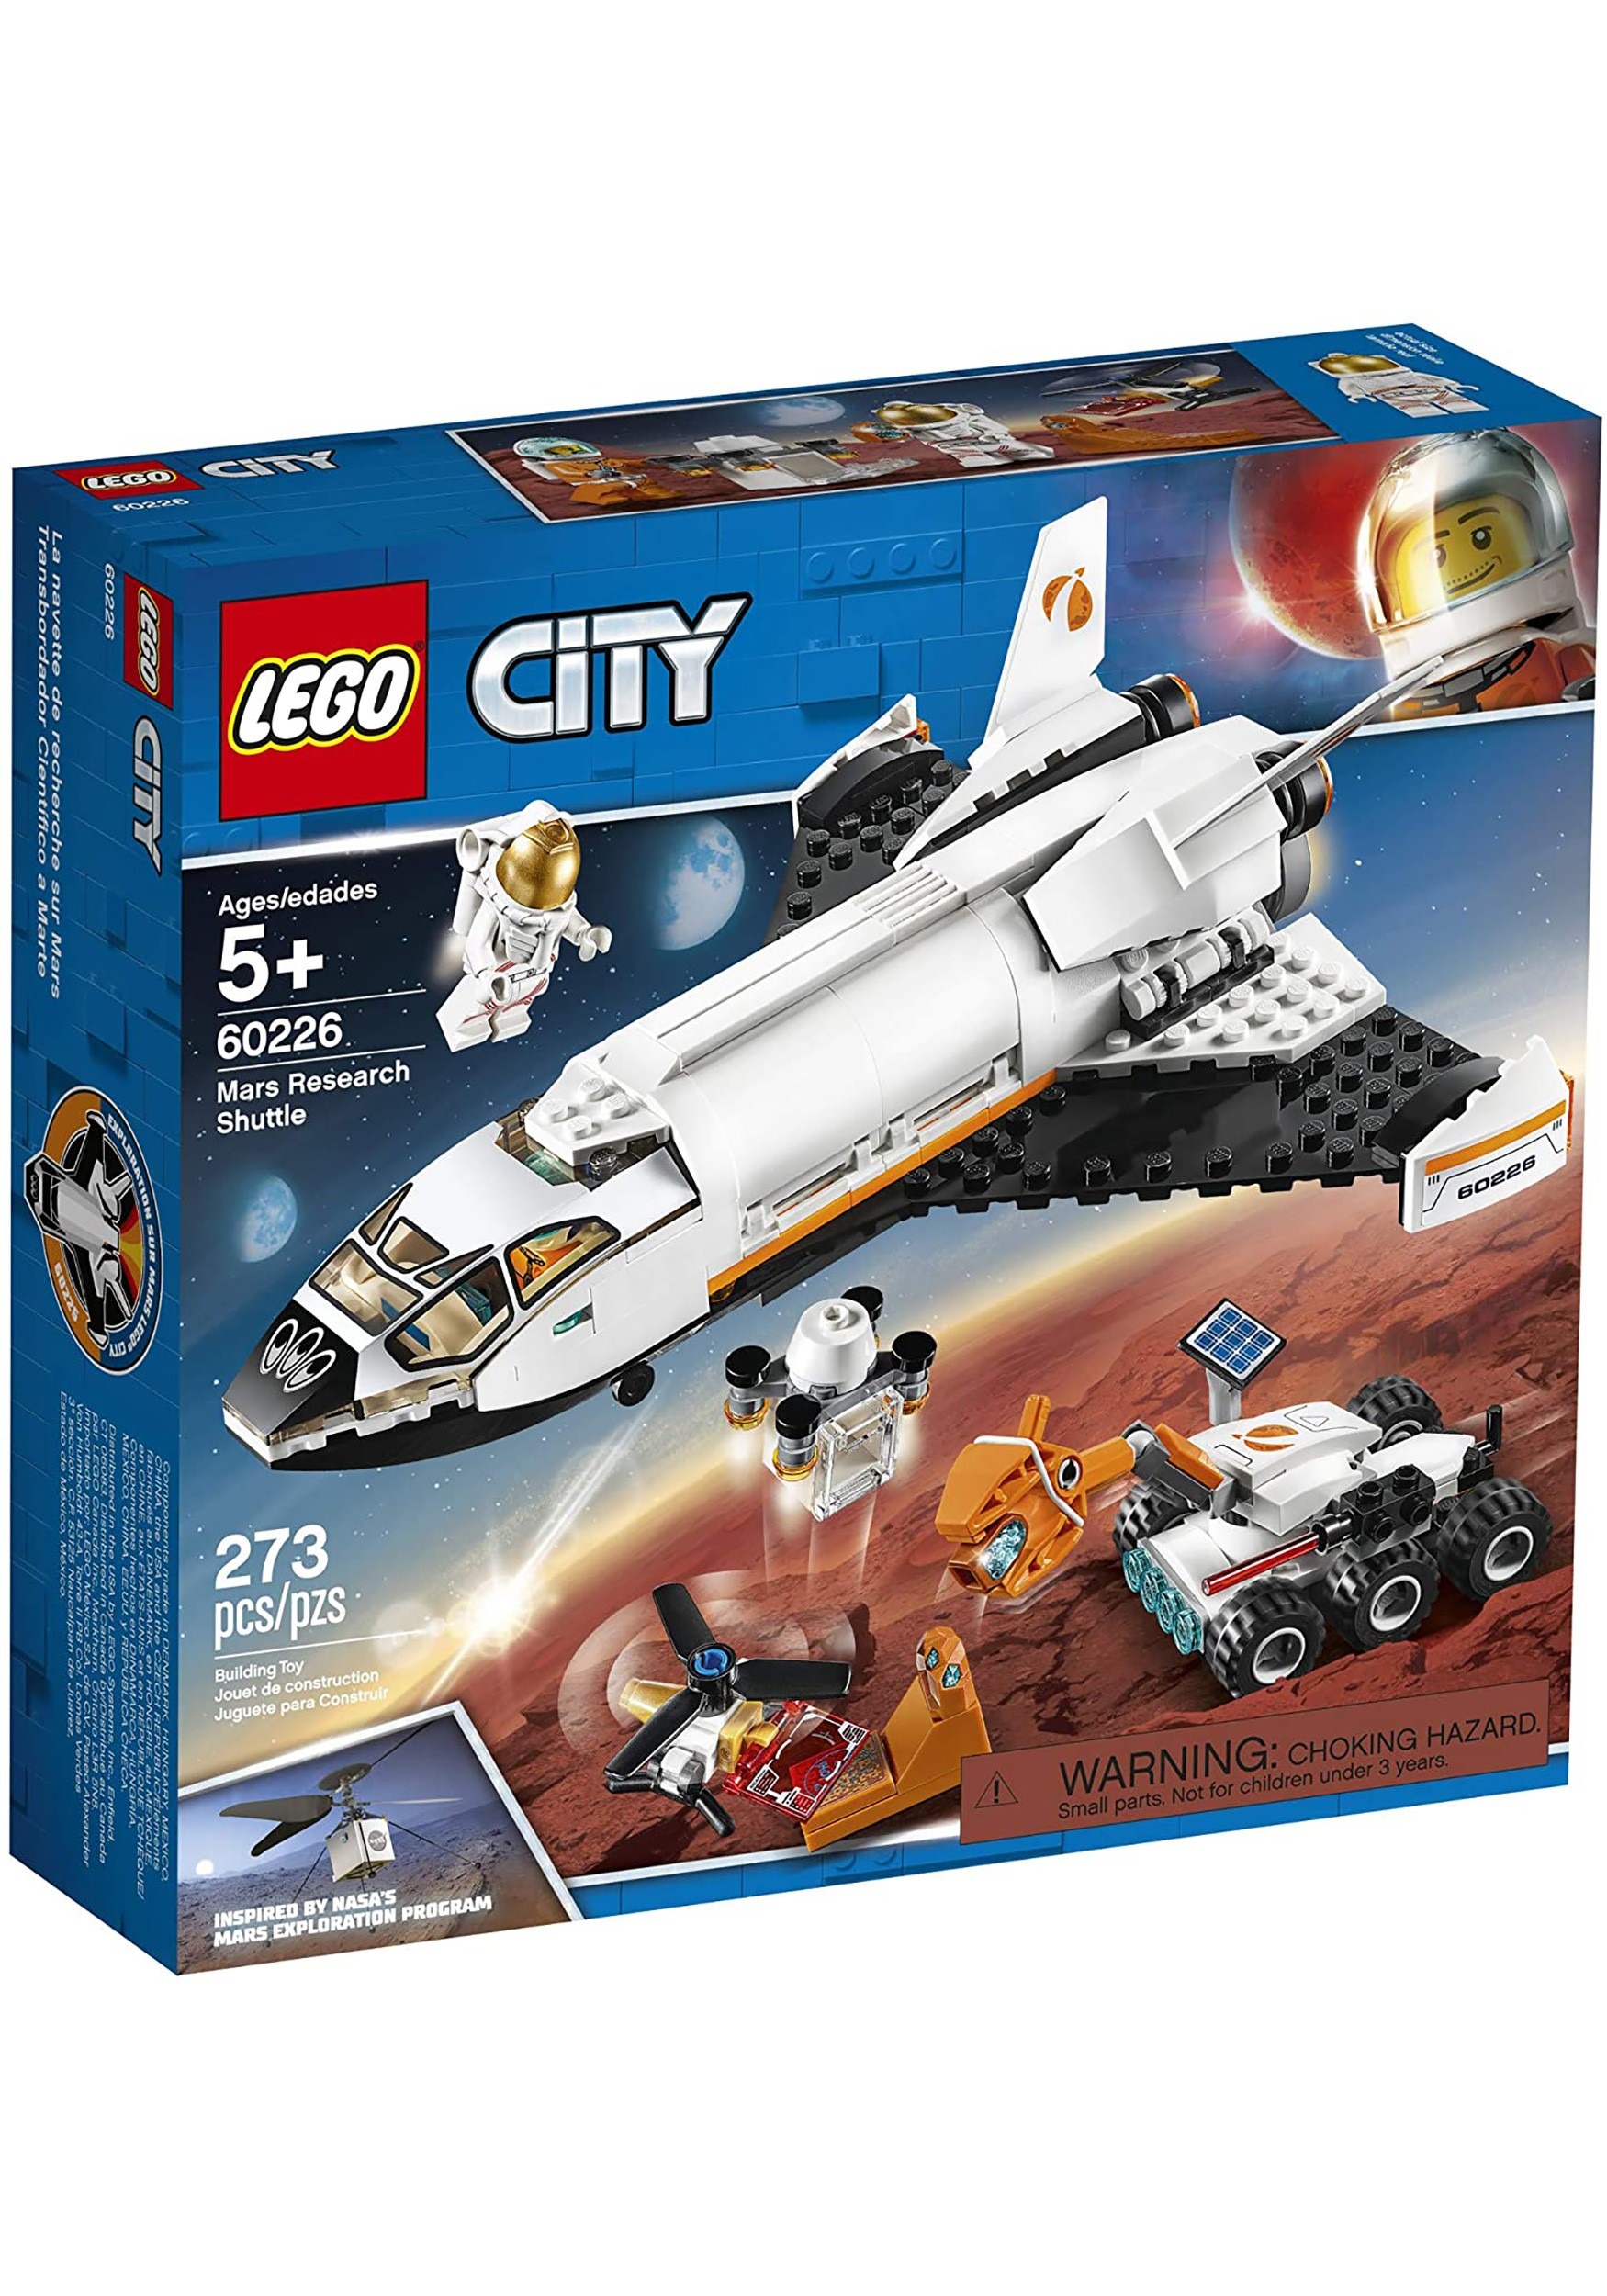 Compatible with Lego 60226 Building Blocks Model Not Include The Lego Set BRIKSMAX Led Lighting Kit for Mars Research Shuttle